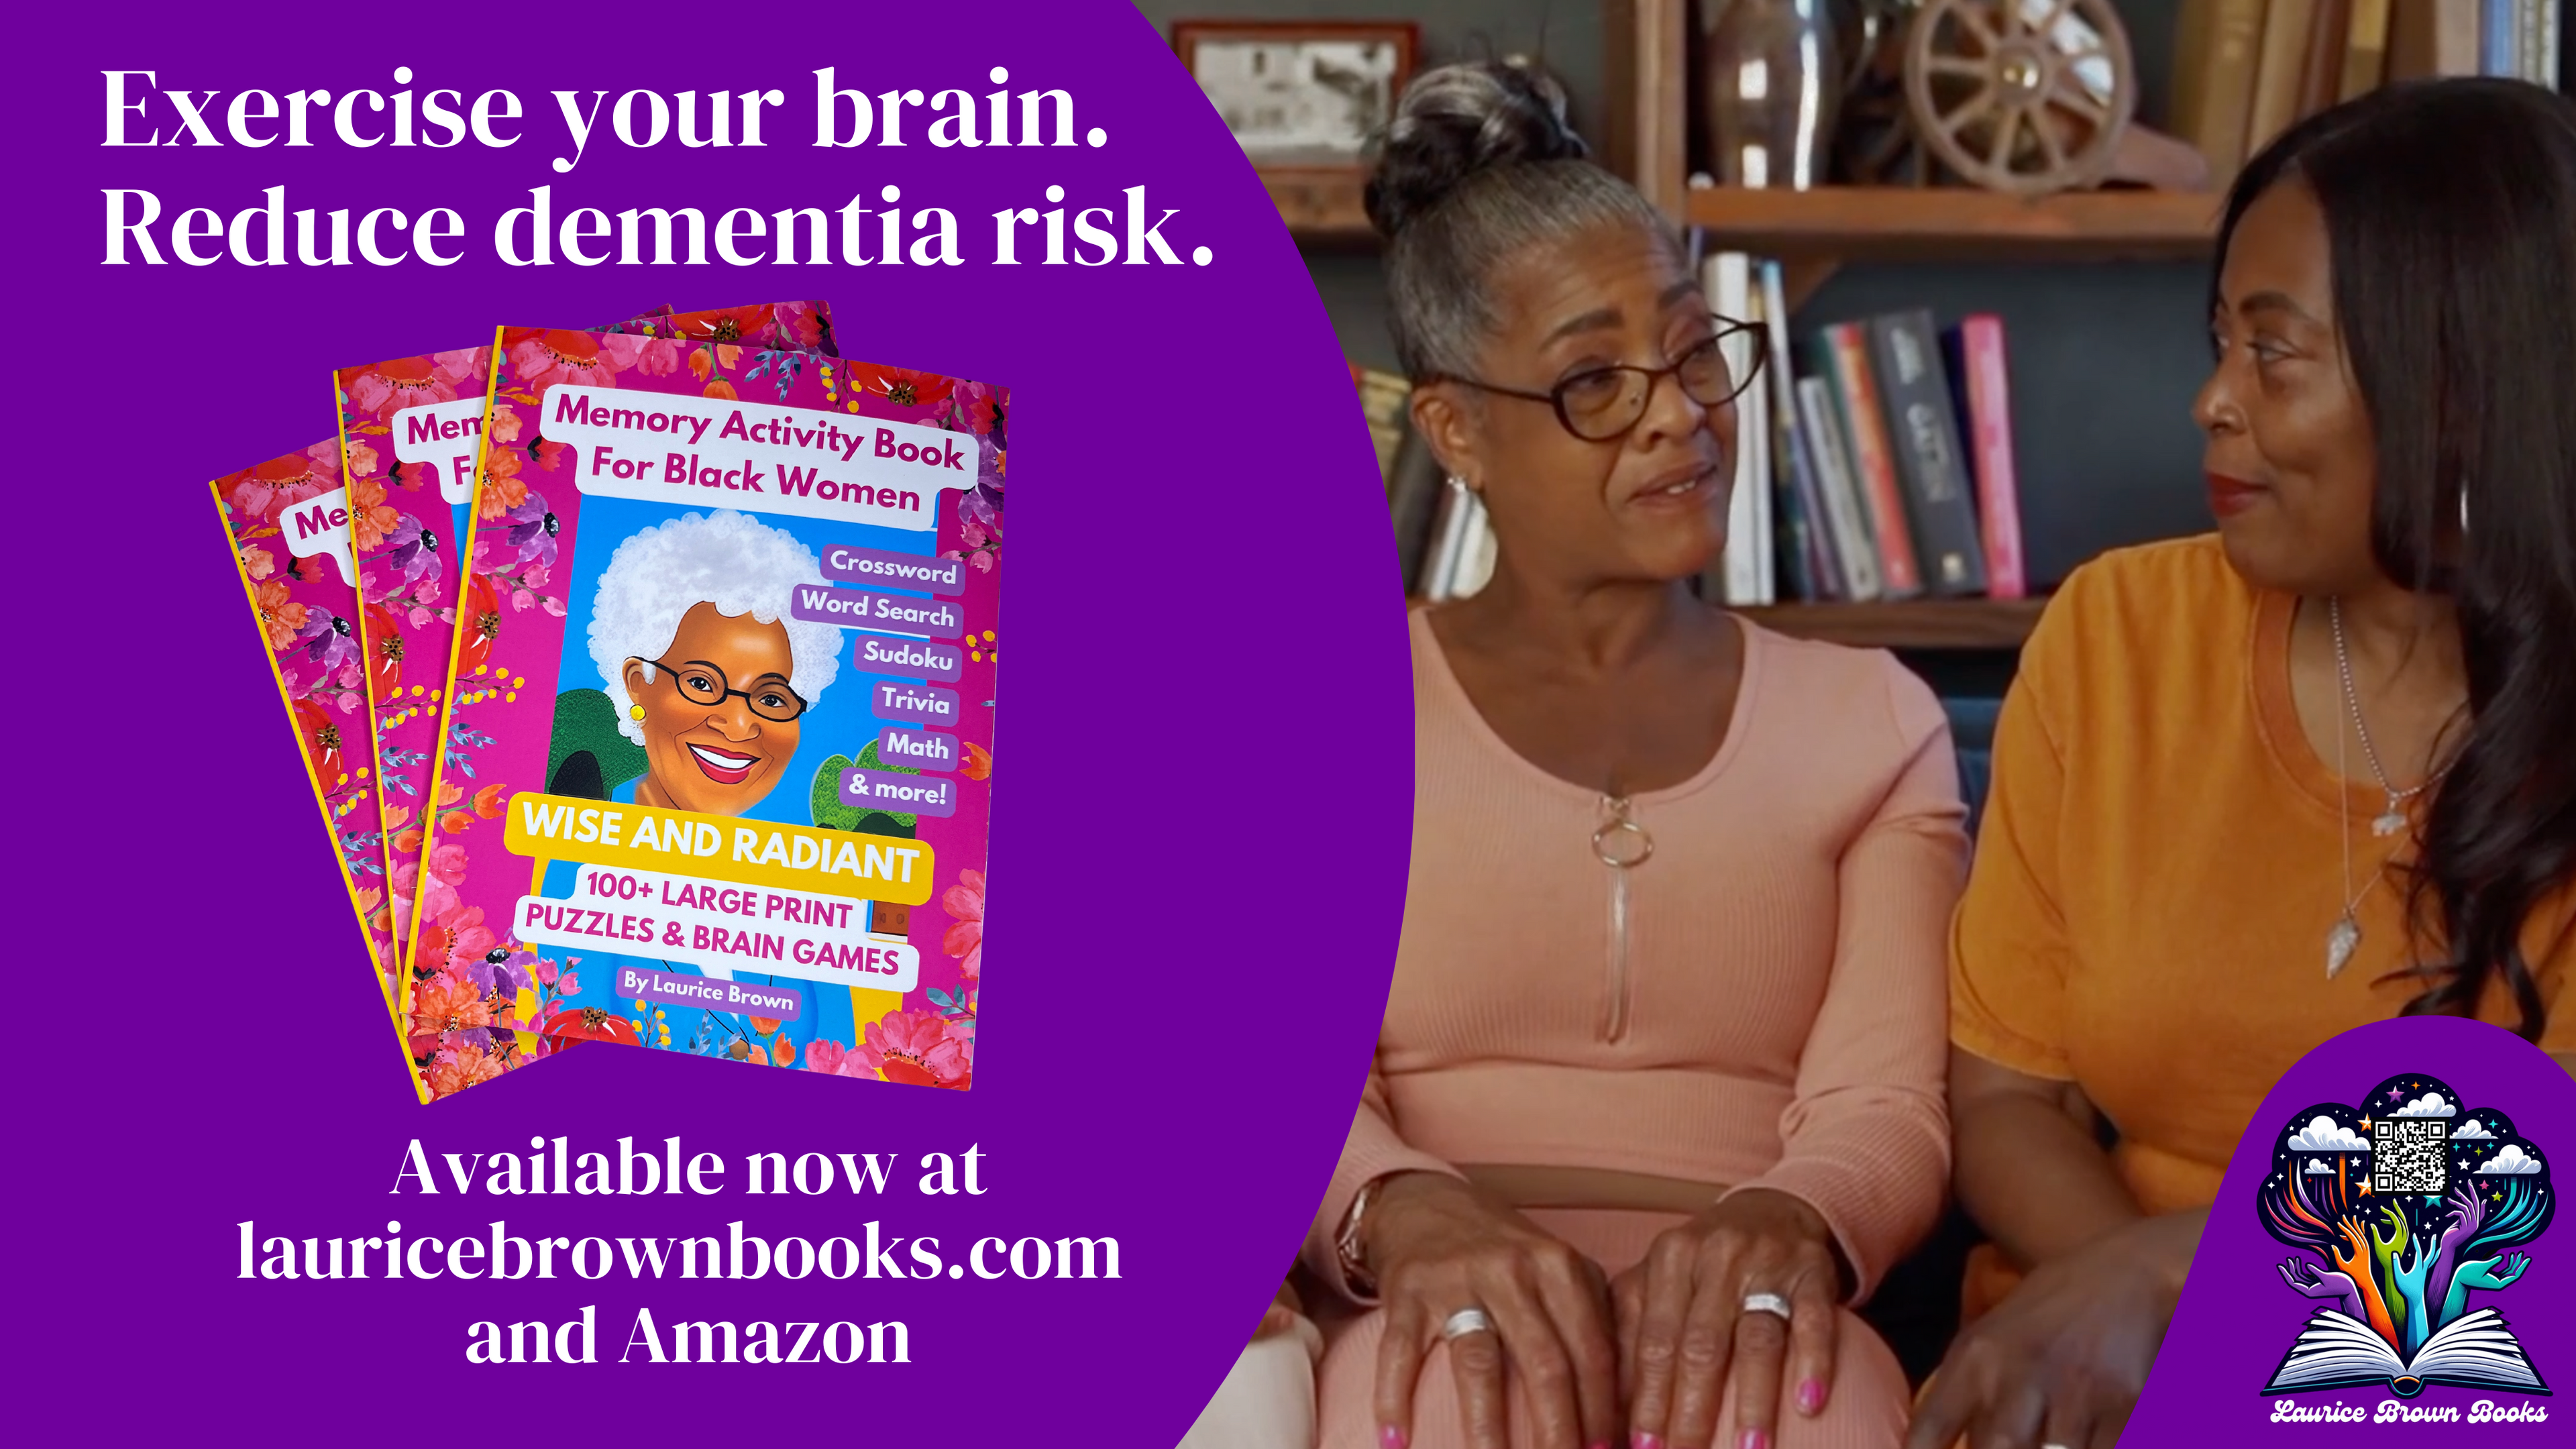 Load video: promo video of wise &amp; radiant book features a montage of middle and older age black women, the book, and the laurice brown books logo